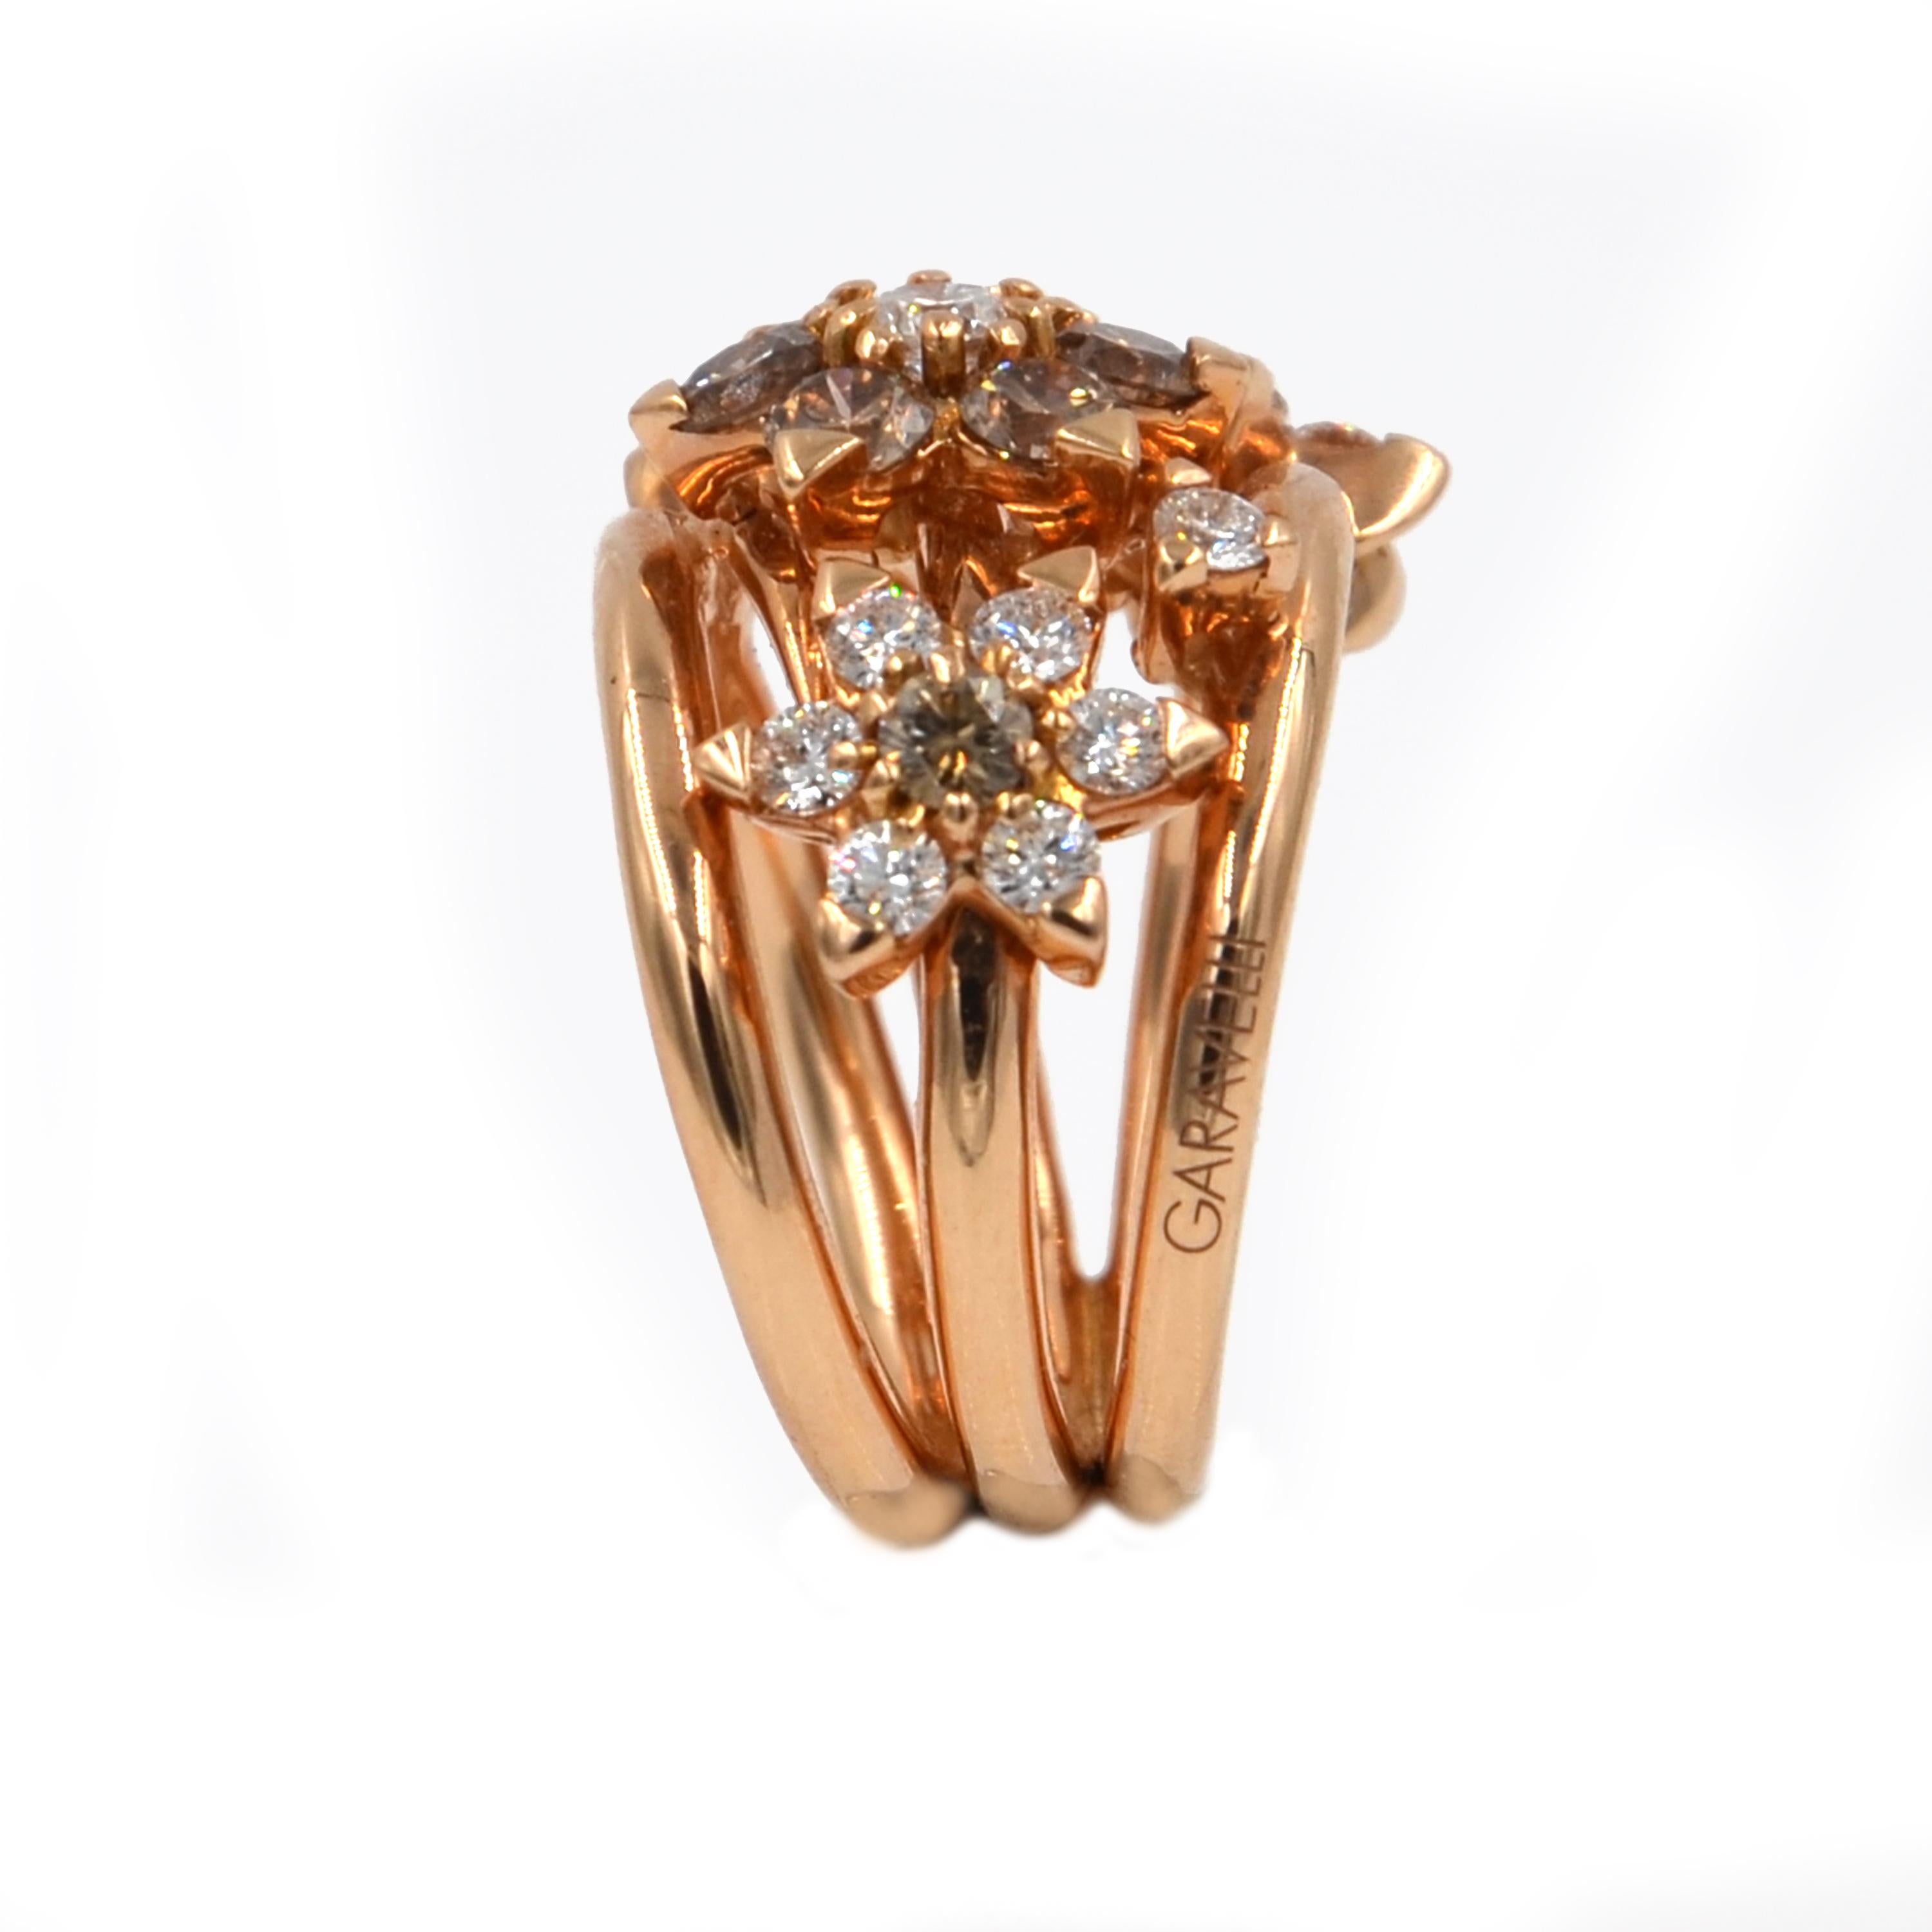 18KT Rose Gold   white and brown diamonds GARAVELLI flower cocktail ring.
Finger size 54  Can be customized in the size.
Made in Italy, in Valenza.

18KT ROSE GOLD  :GR 17.33
BROWN DIAMONDS ct : 1,46
WHITE DIAMONDS ct : 0.98